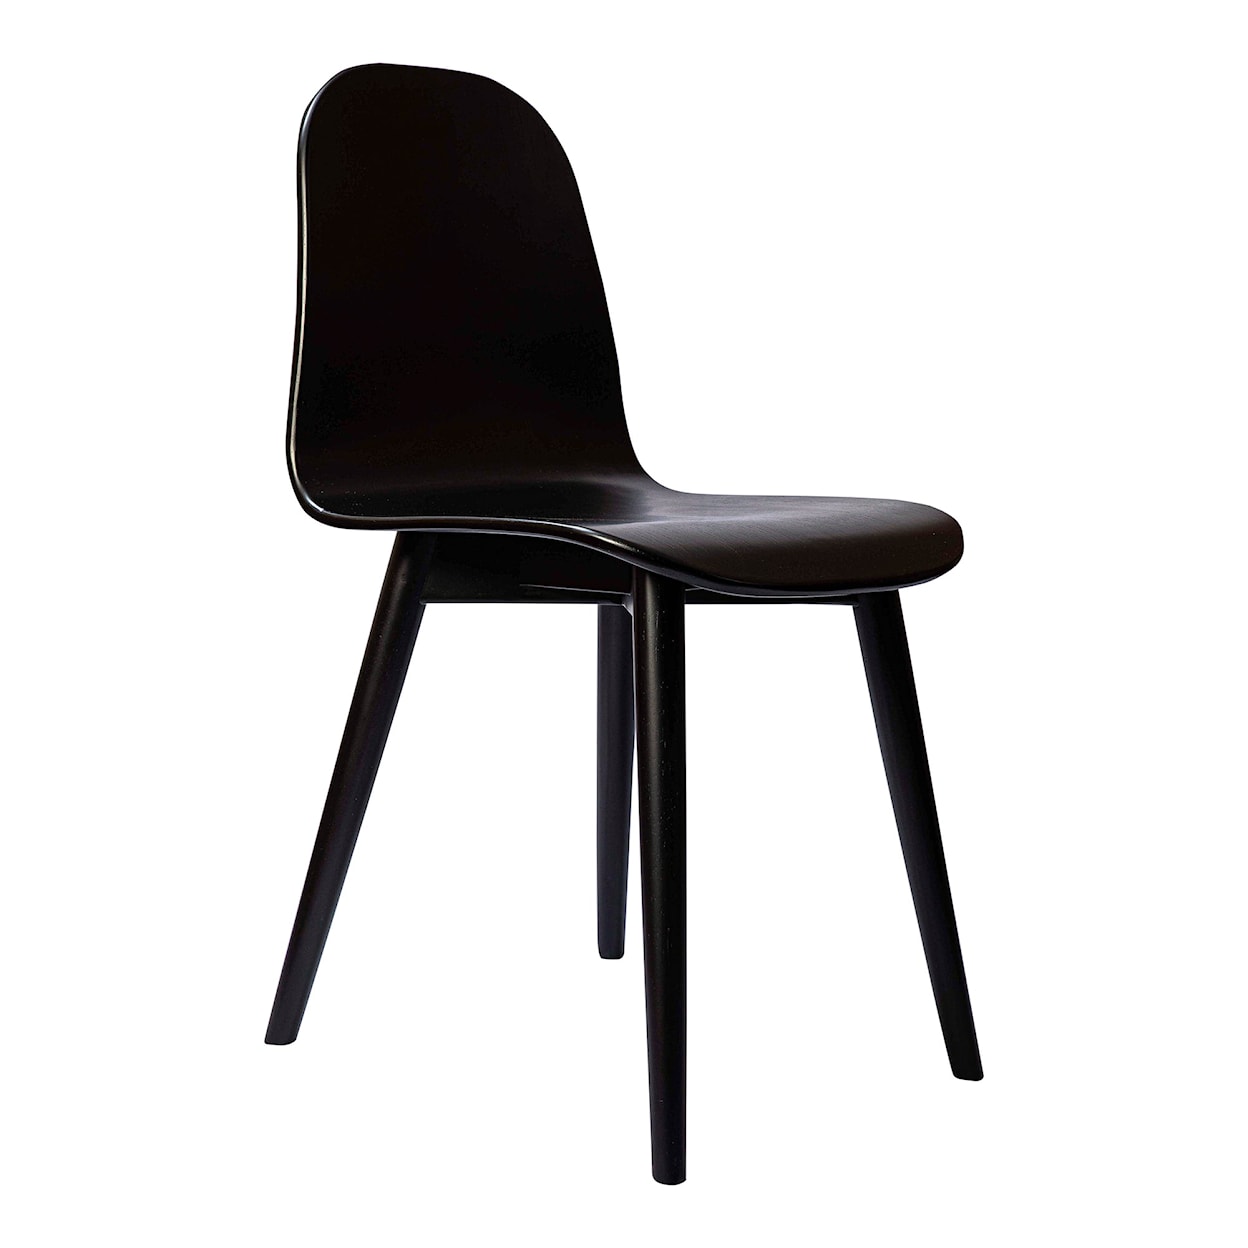 Moe's Home Collection Lissi Dining Chair